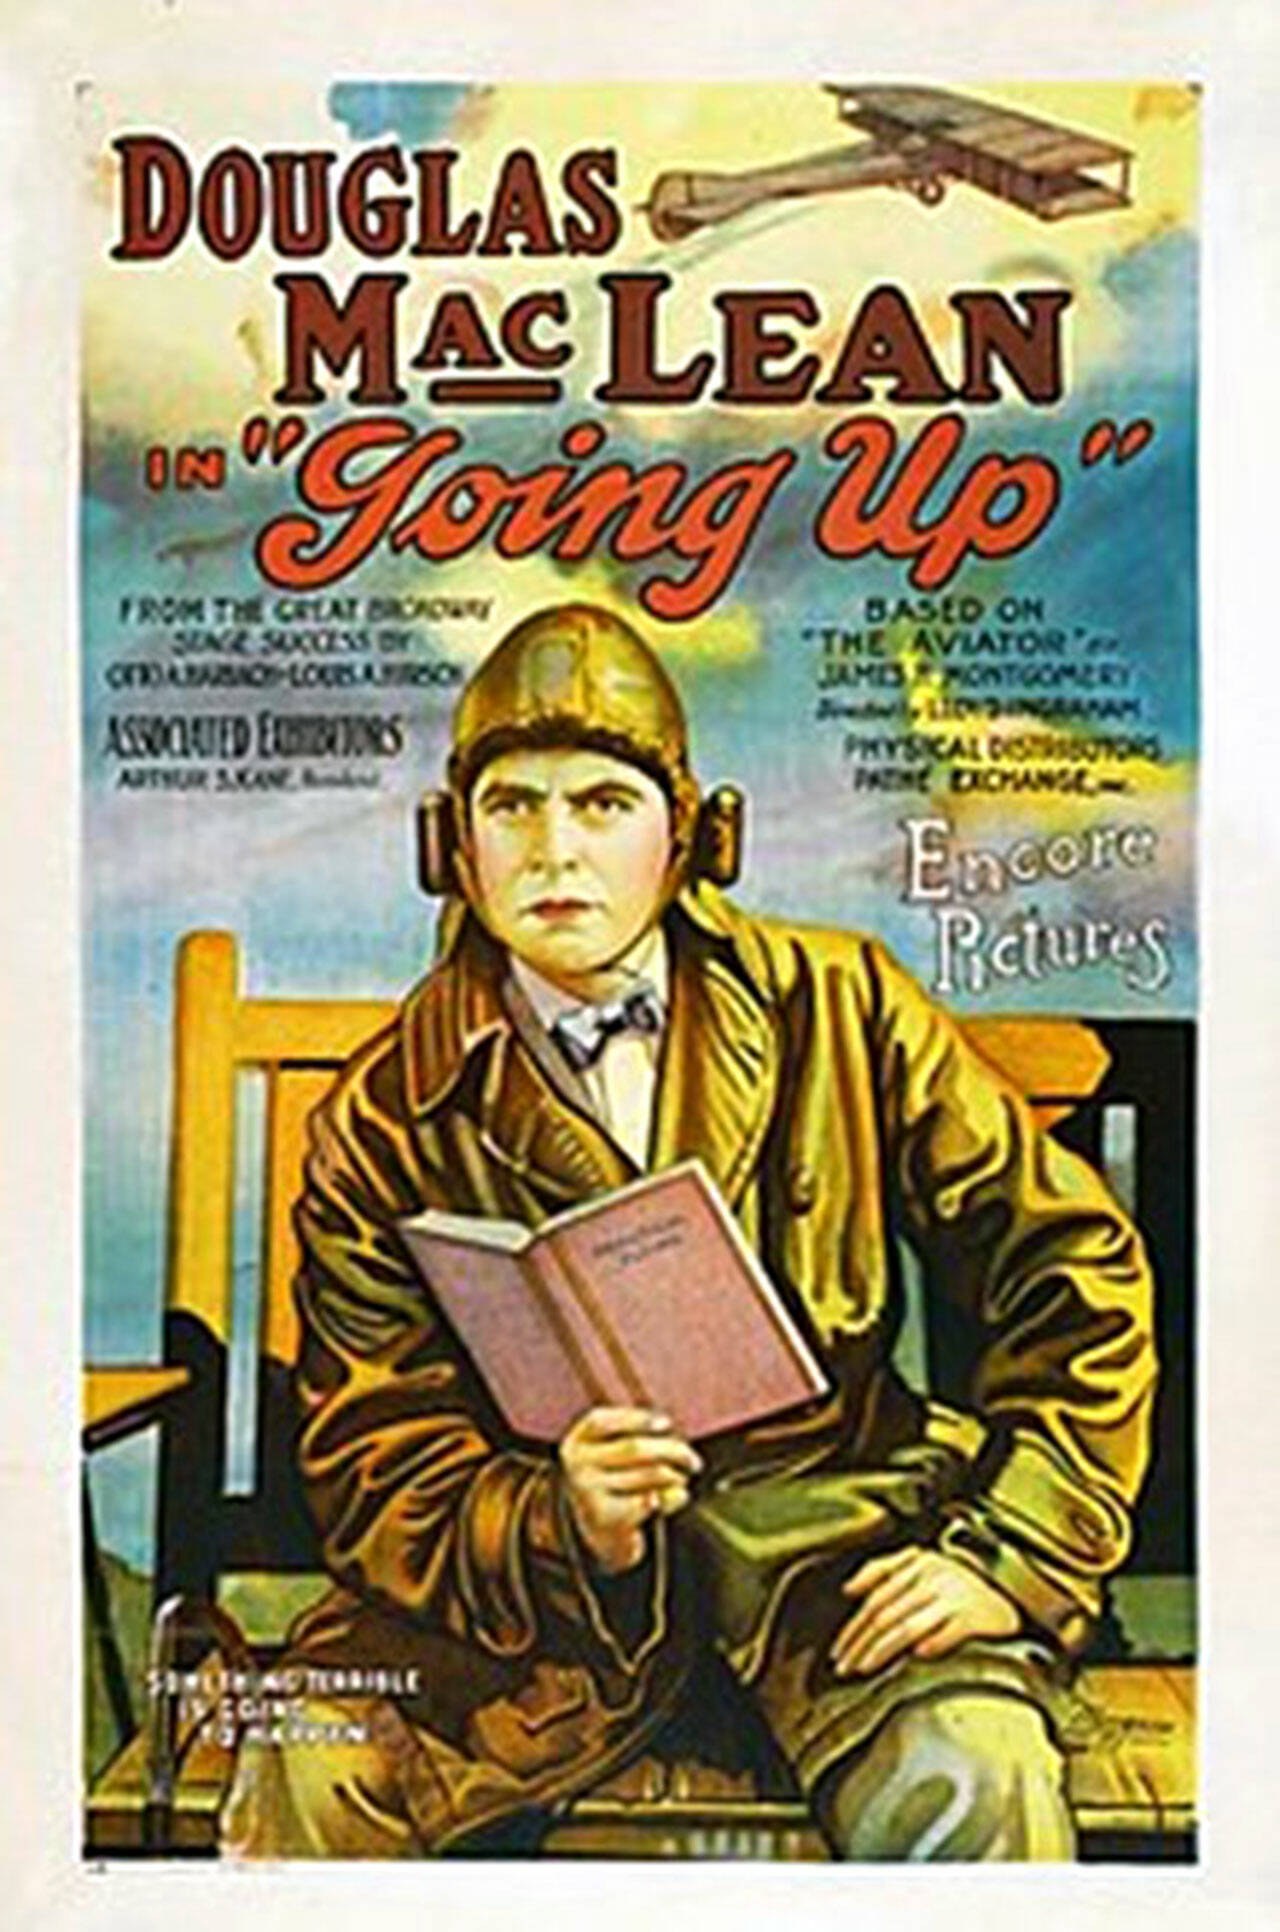 A movie poster for “Going Up.”